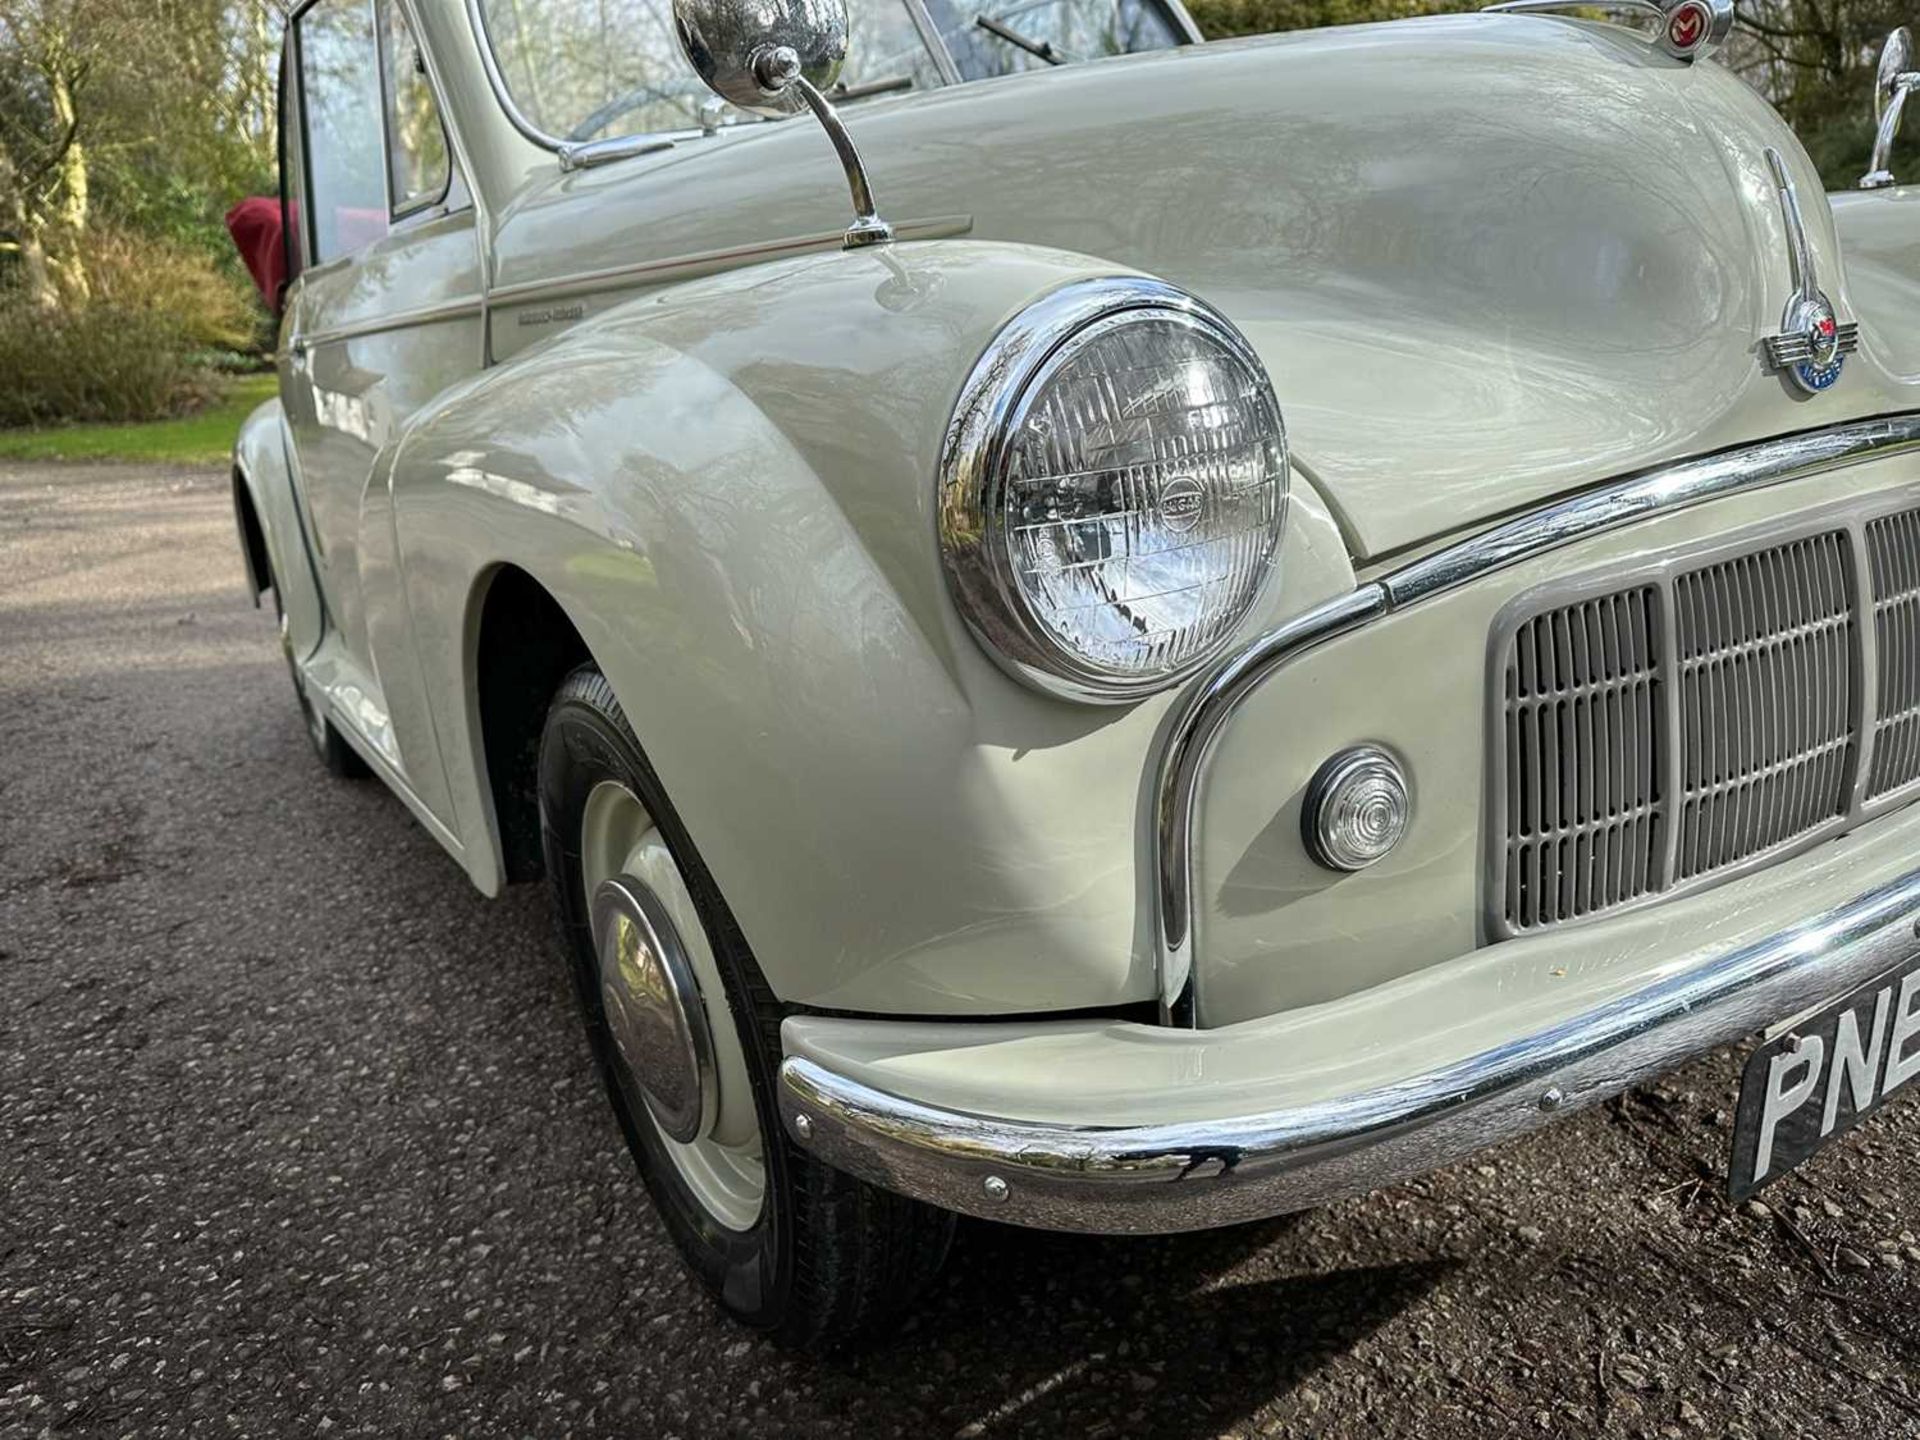 1954 Morris Minor Tourer Fully restored to concours standard - Image 93 of 100